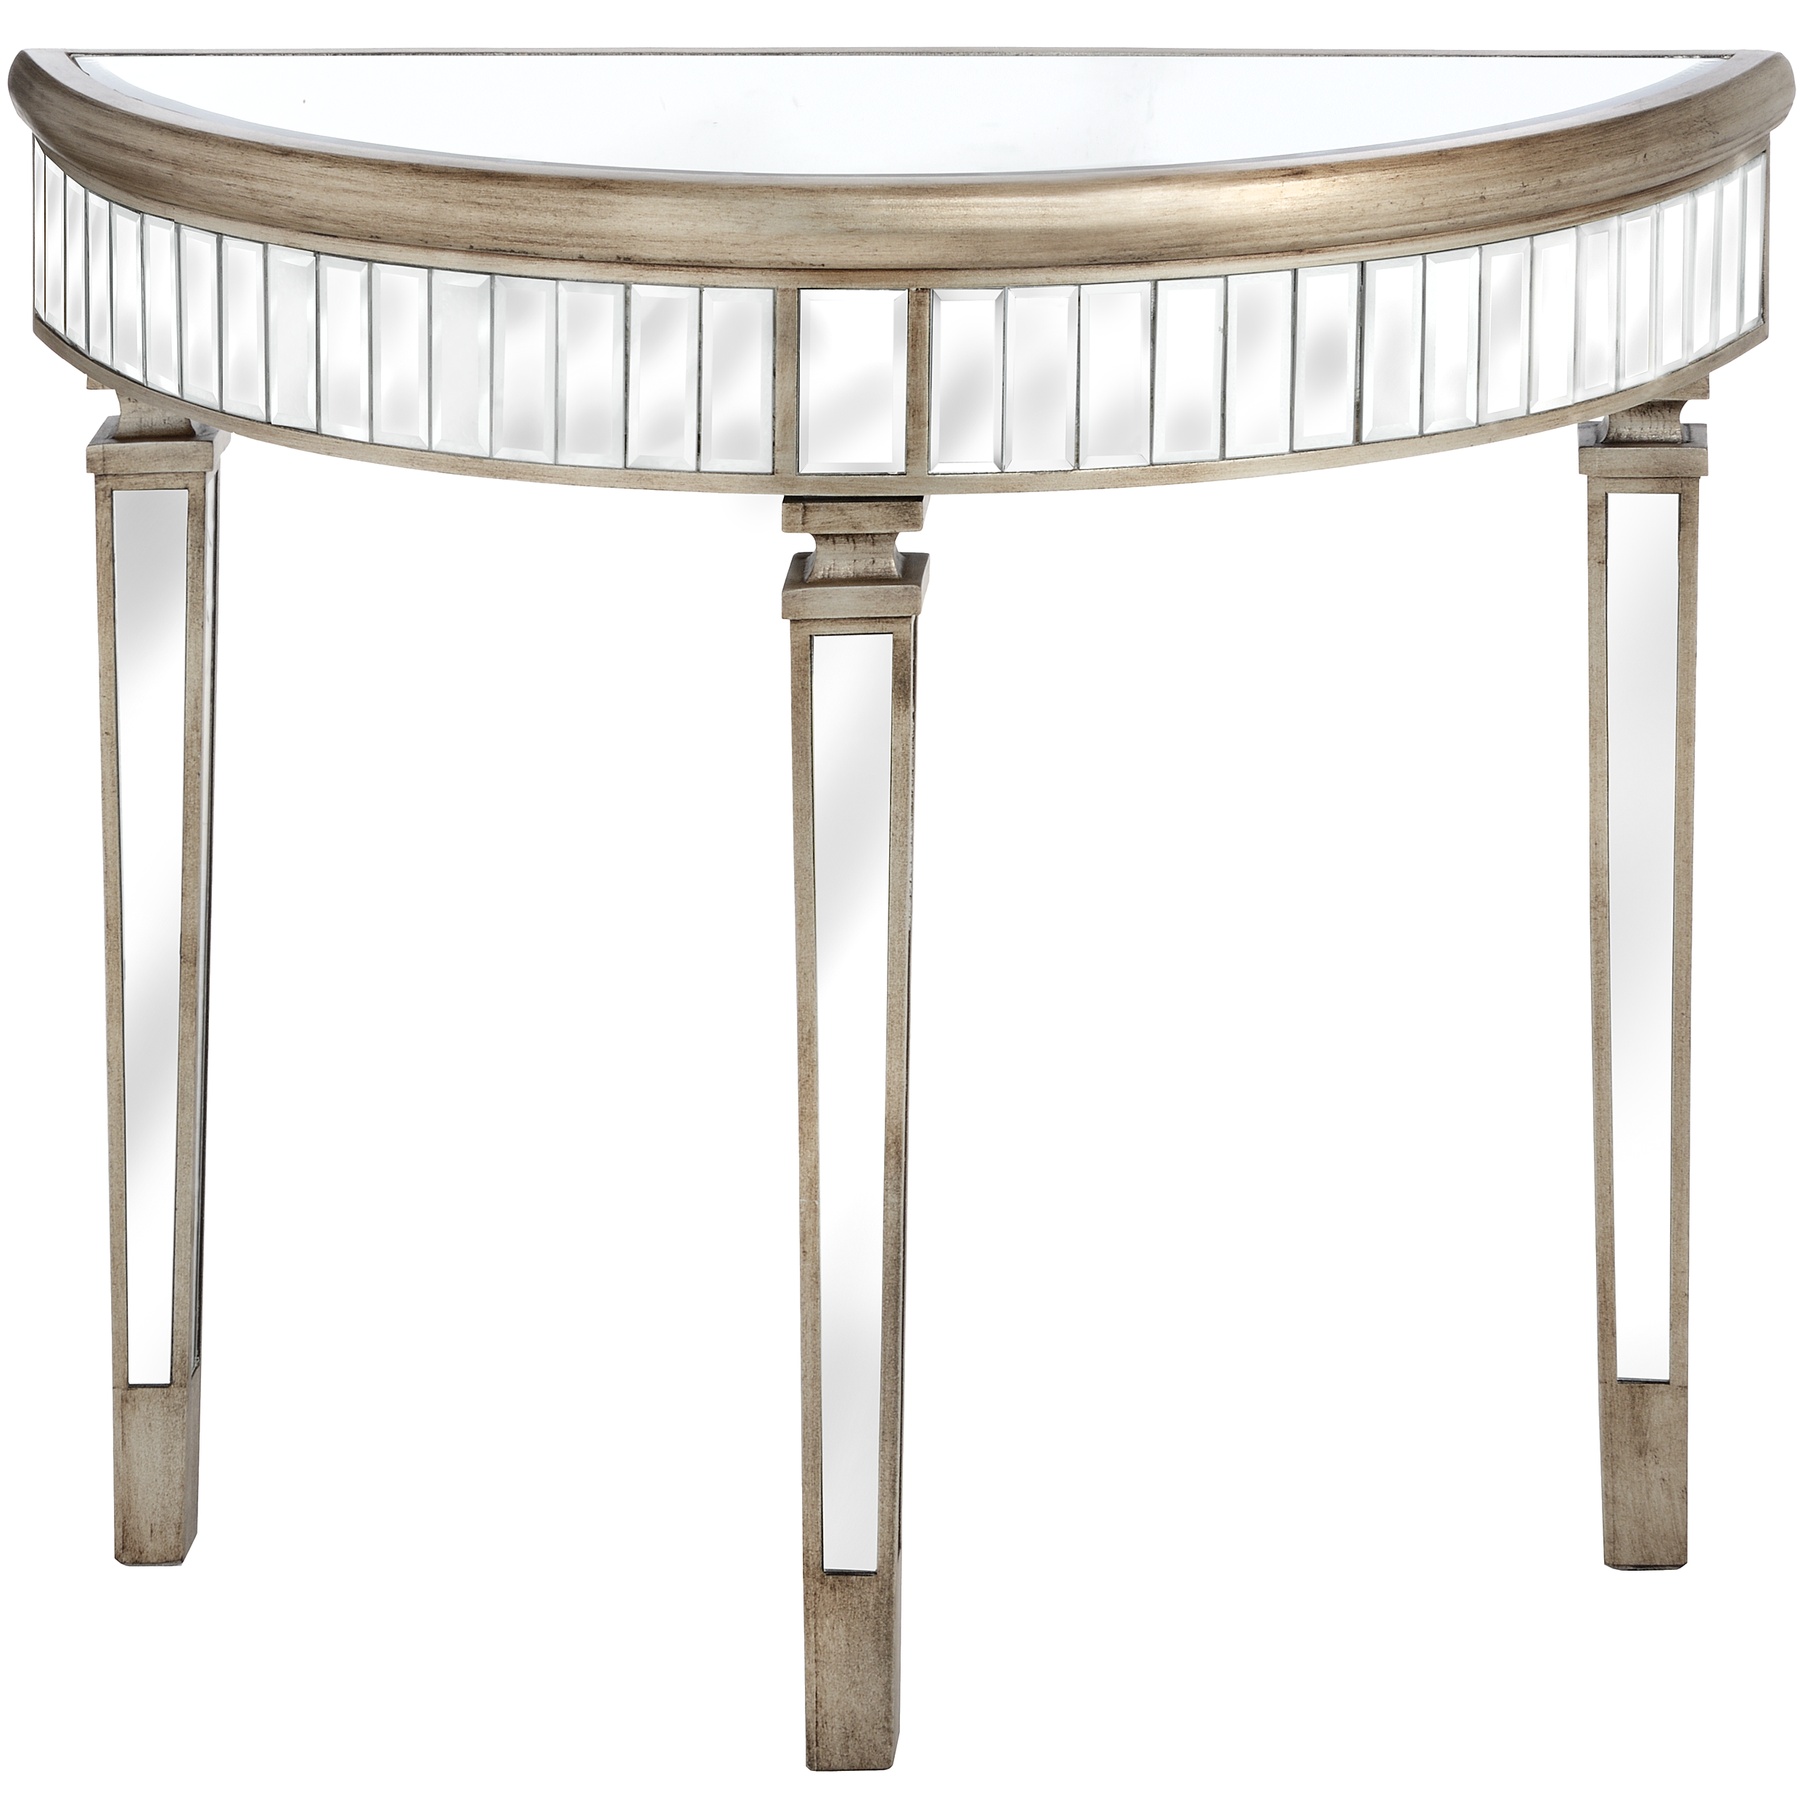 The Belfry Collection Half Moon Mirrored Table